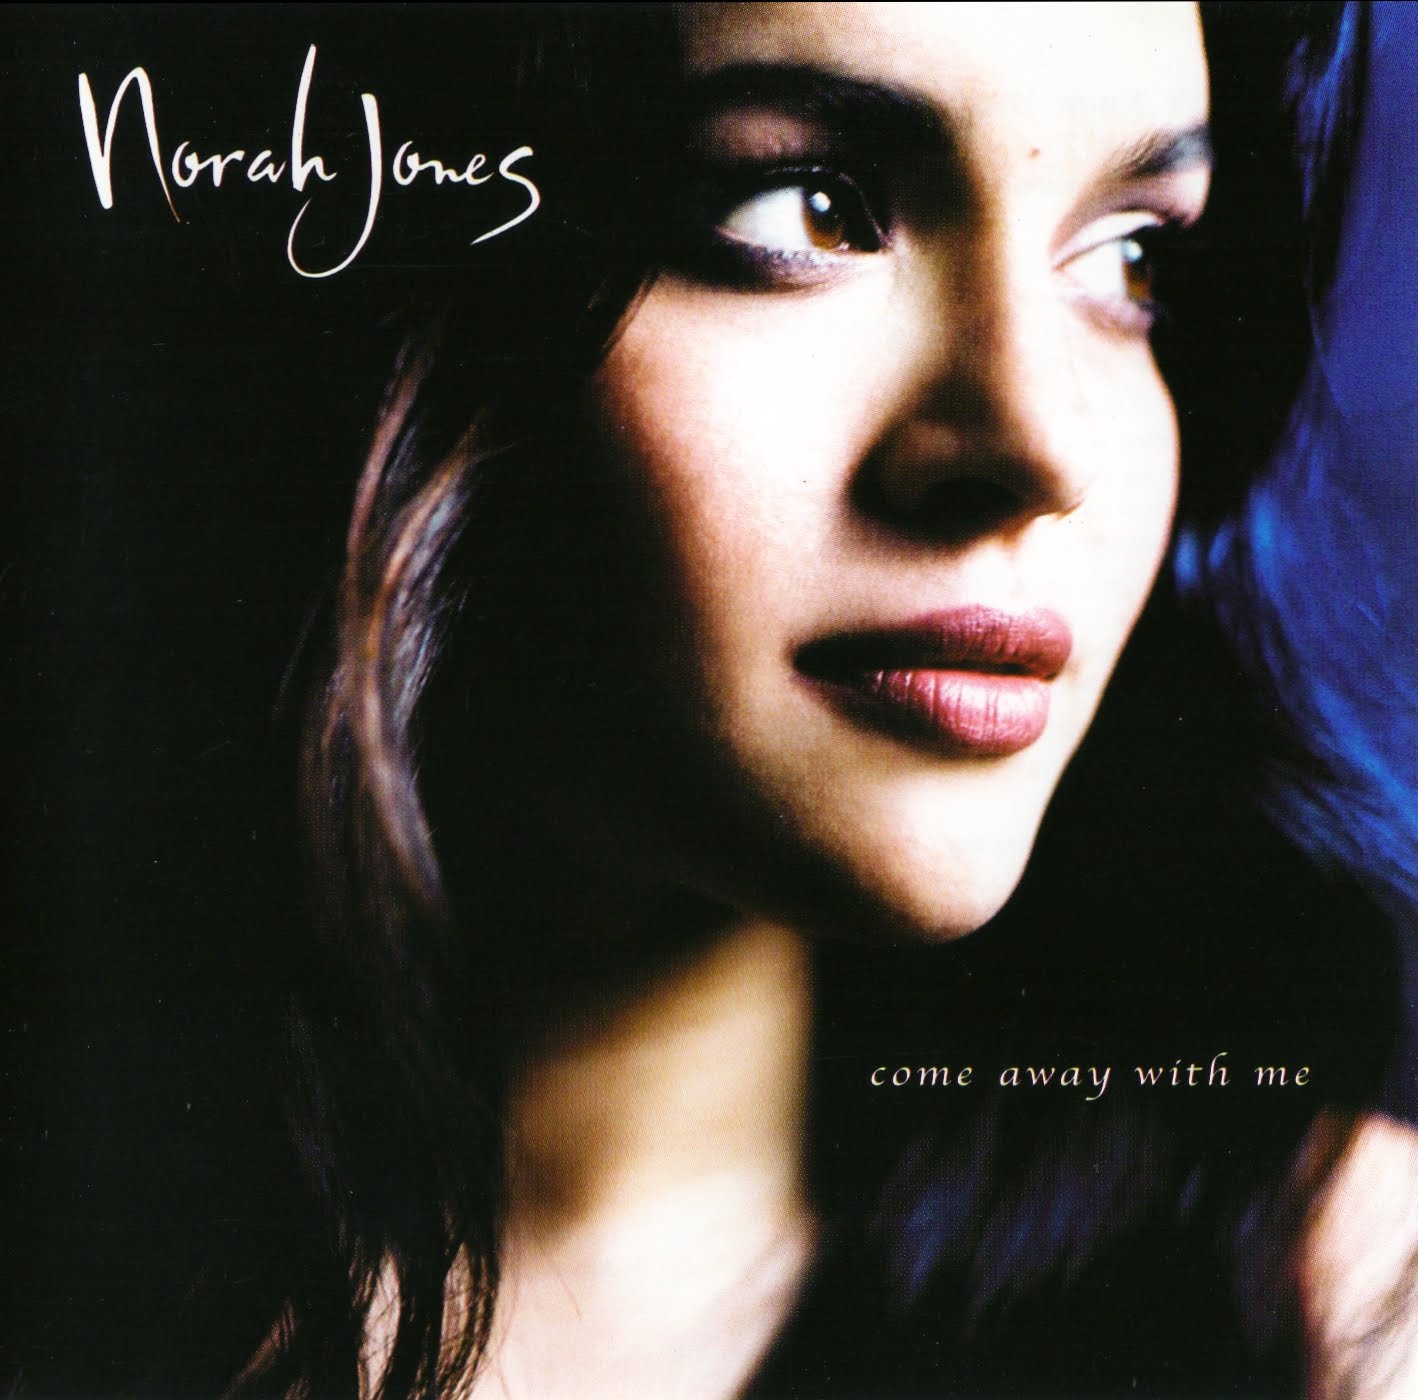 http://3.bp.blogspot.com/_YJM766qf5ps/S_g8OQdTFXI/AAAAAAAAE-0/8UJXiMxwj2o/s1600/Norah+Jones+-+Come+Away+With+Me+-+Front%282%29.jpg